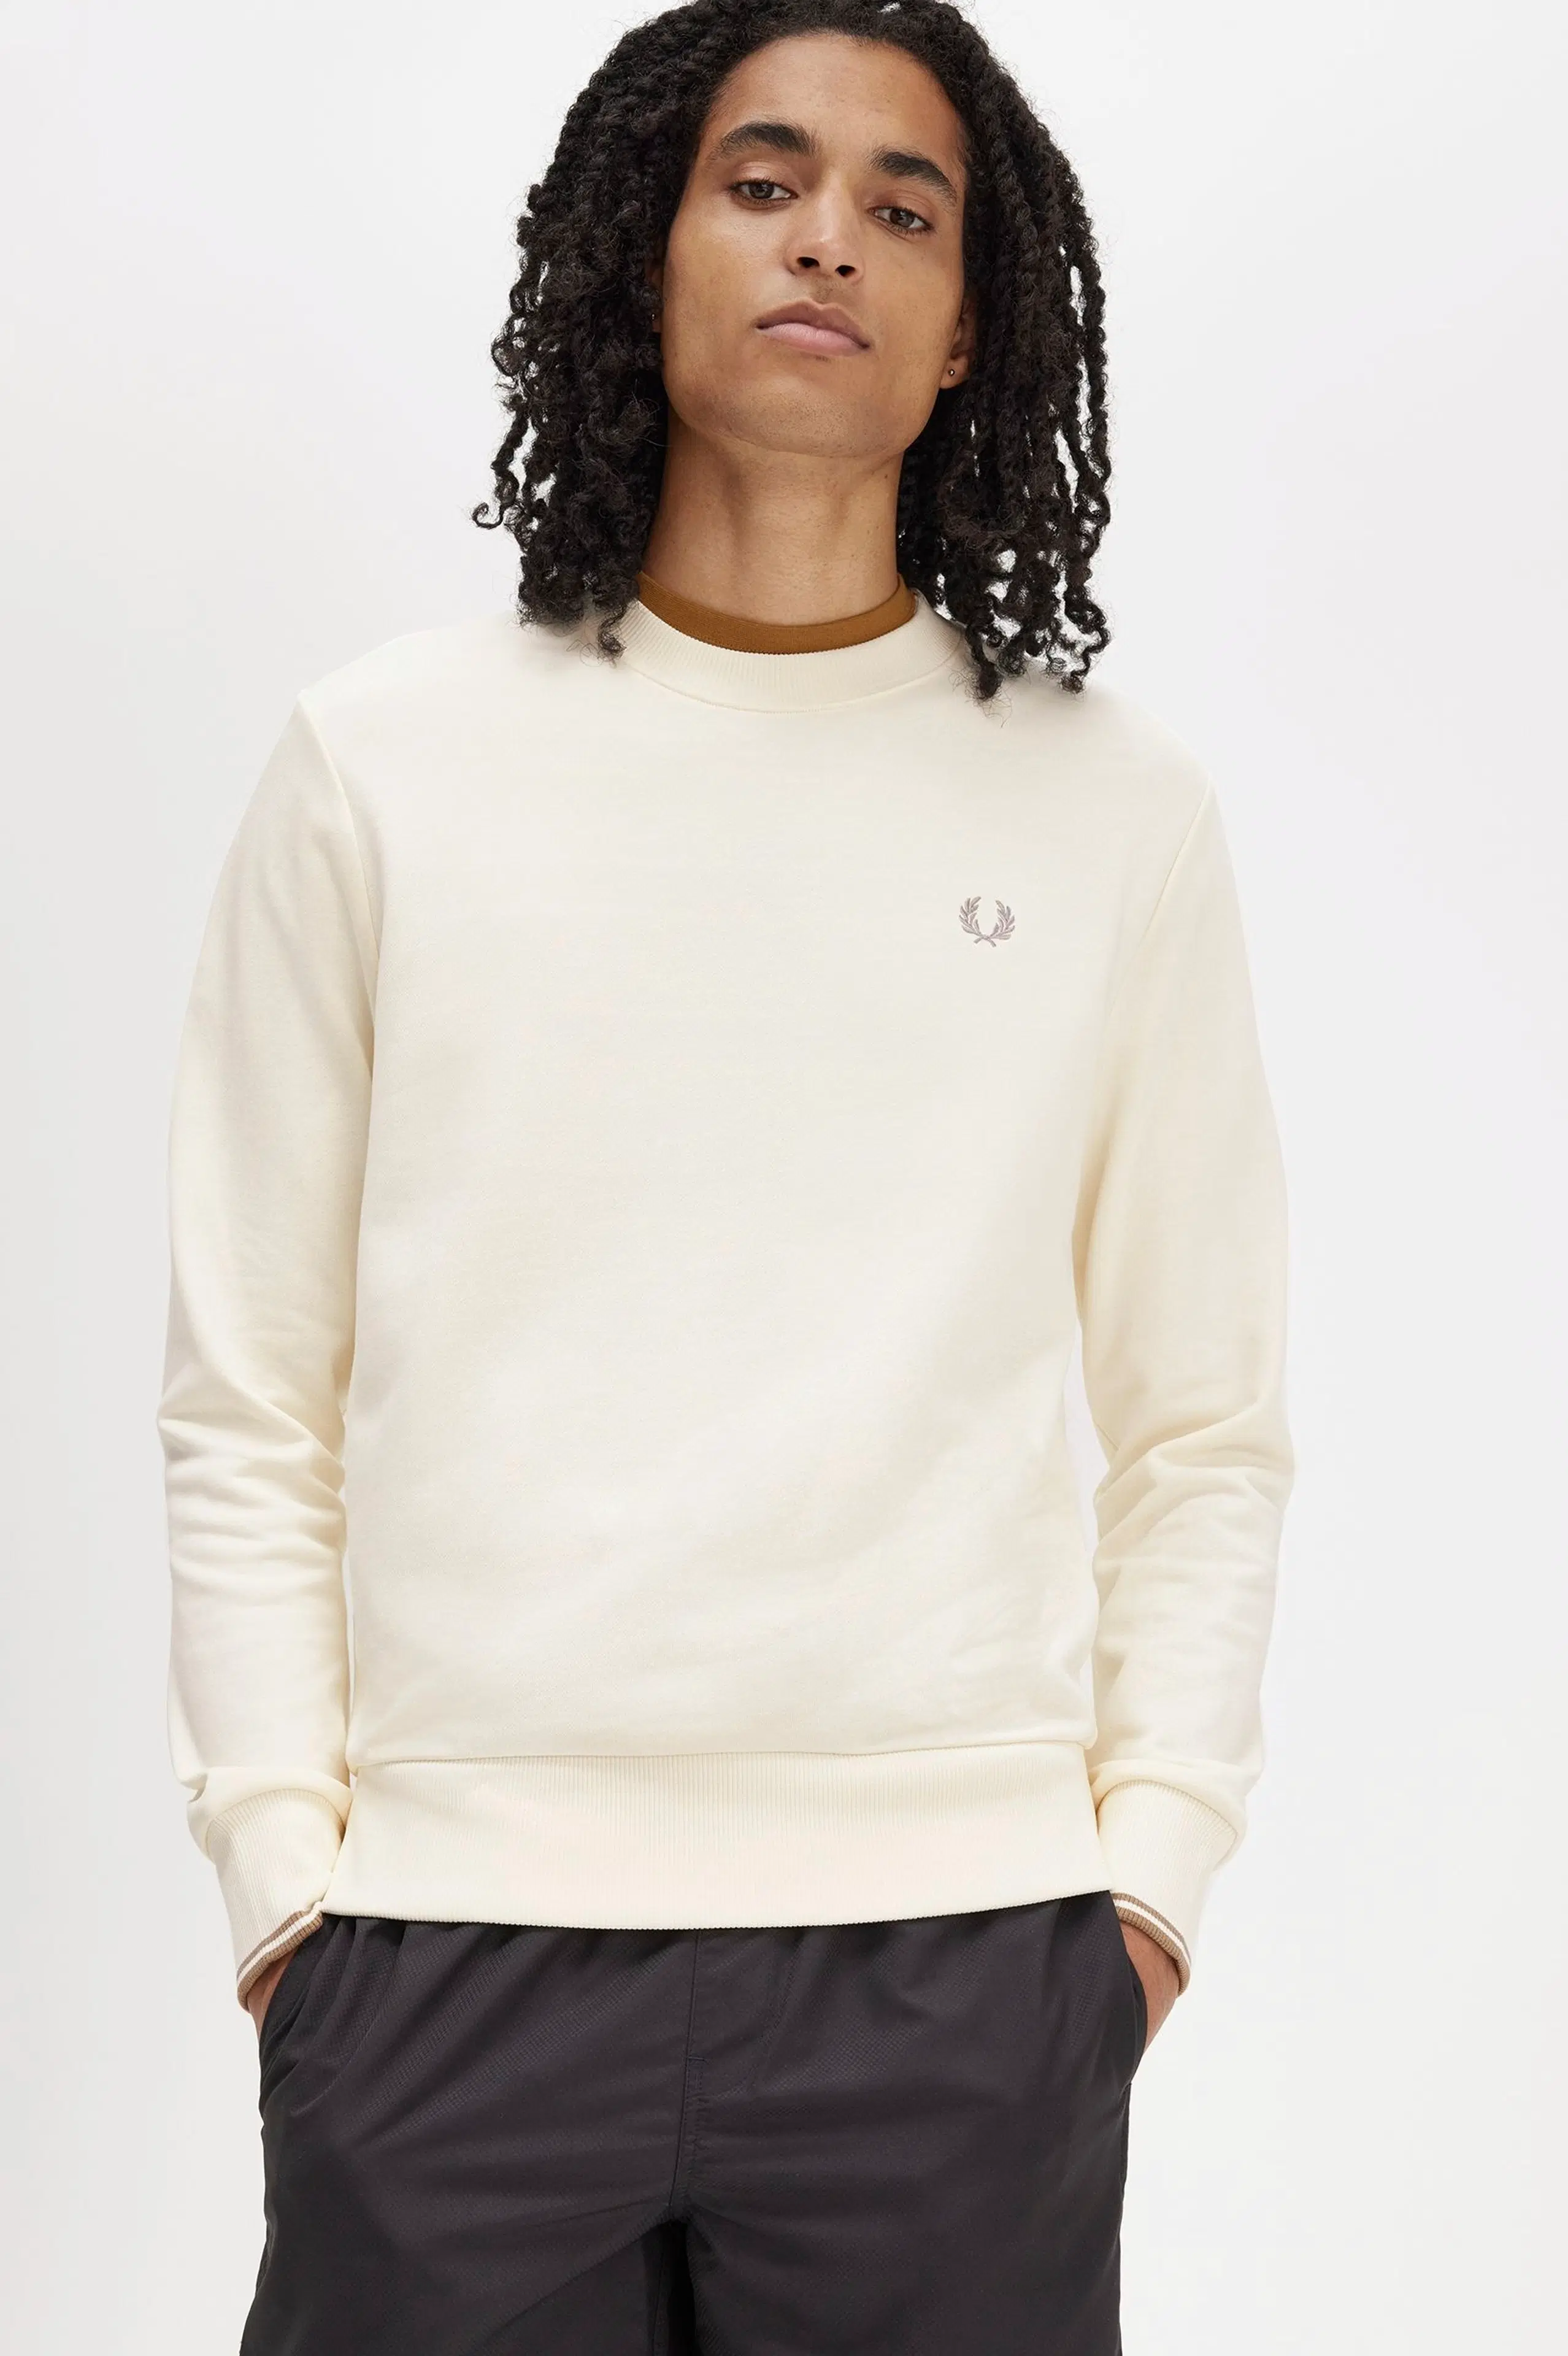 Fred Perry crew college